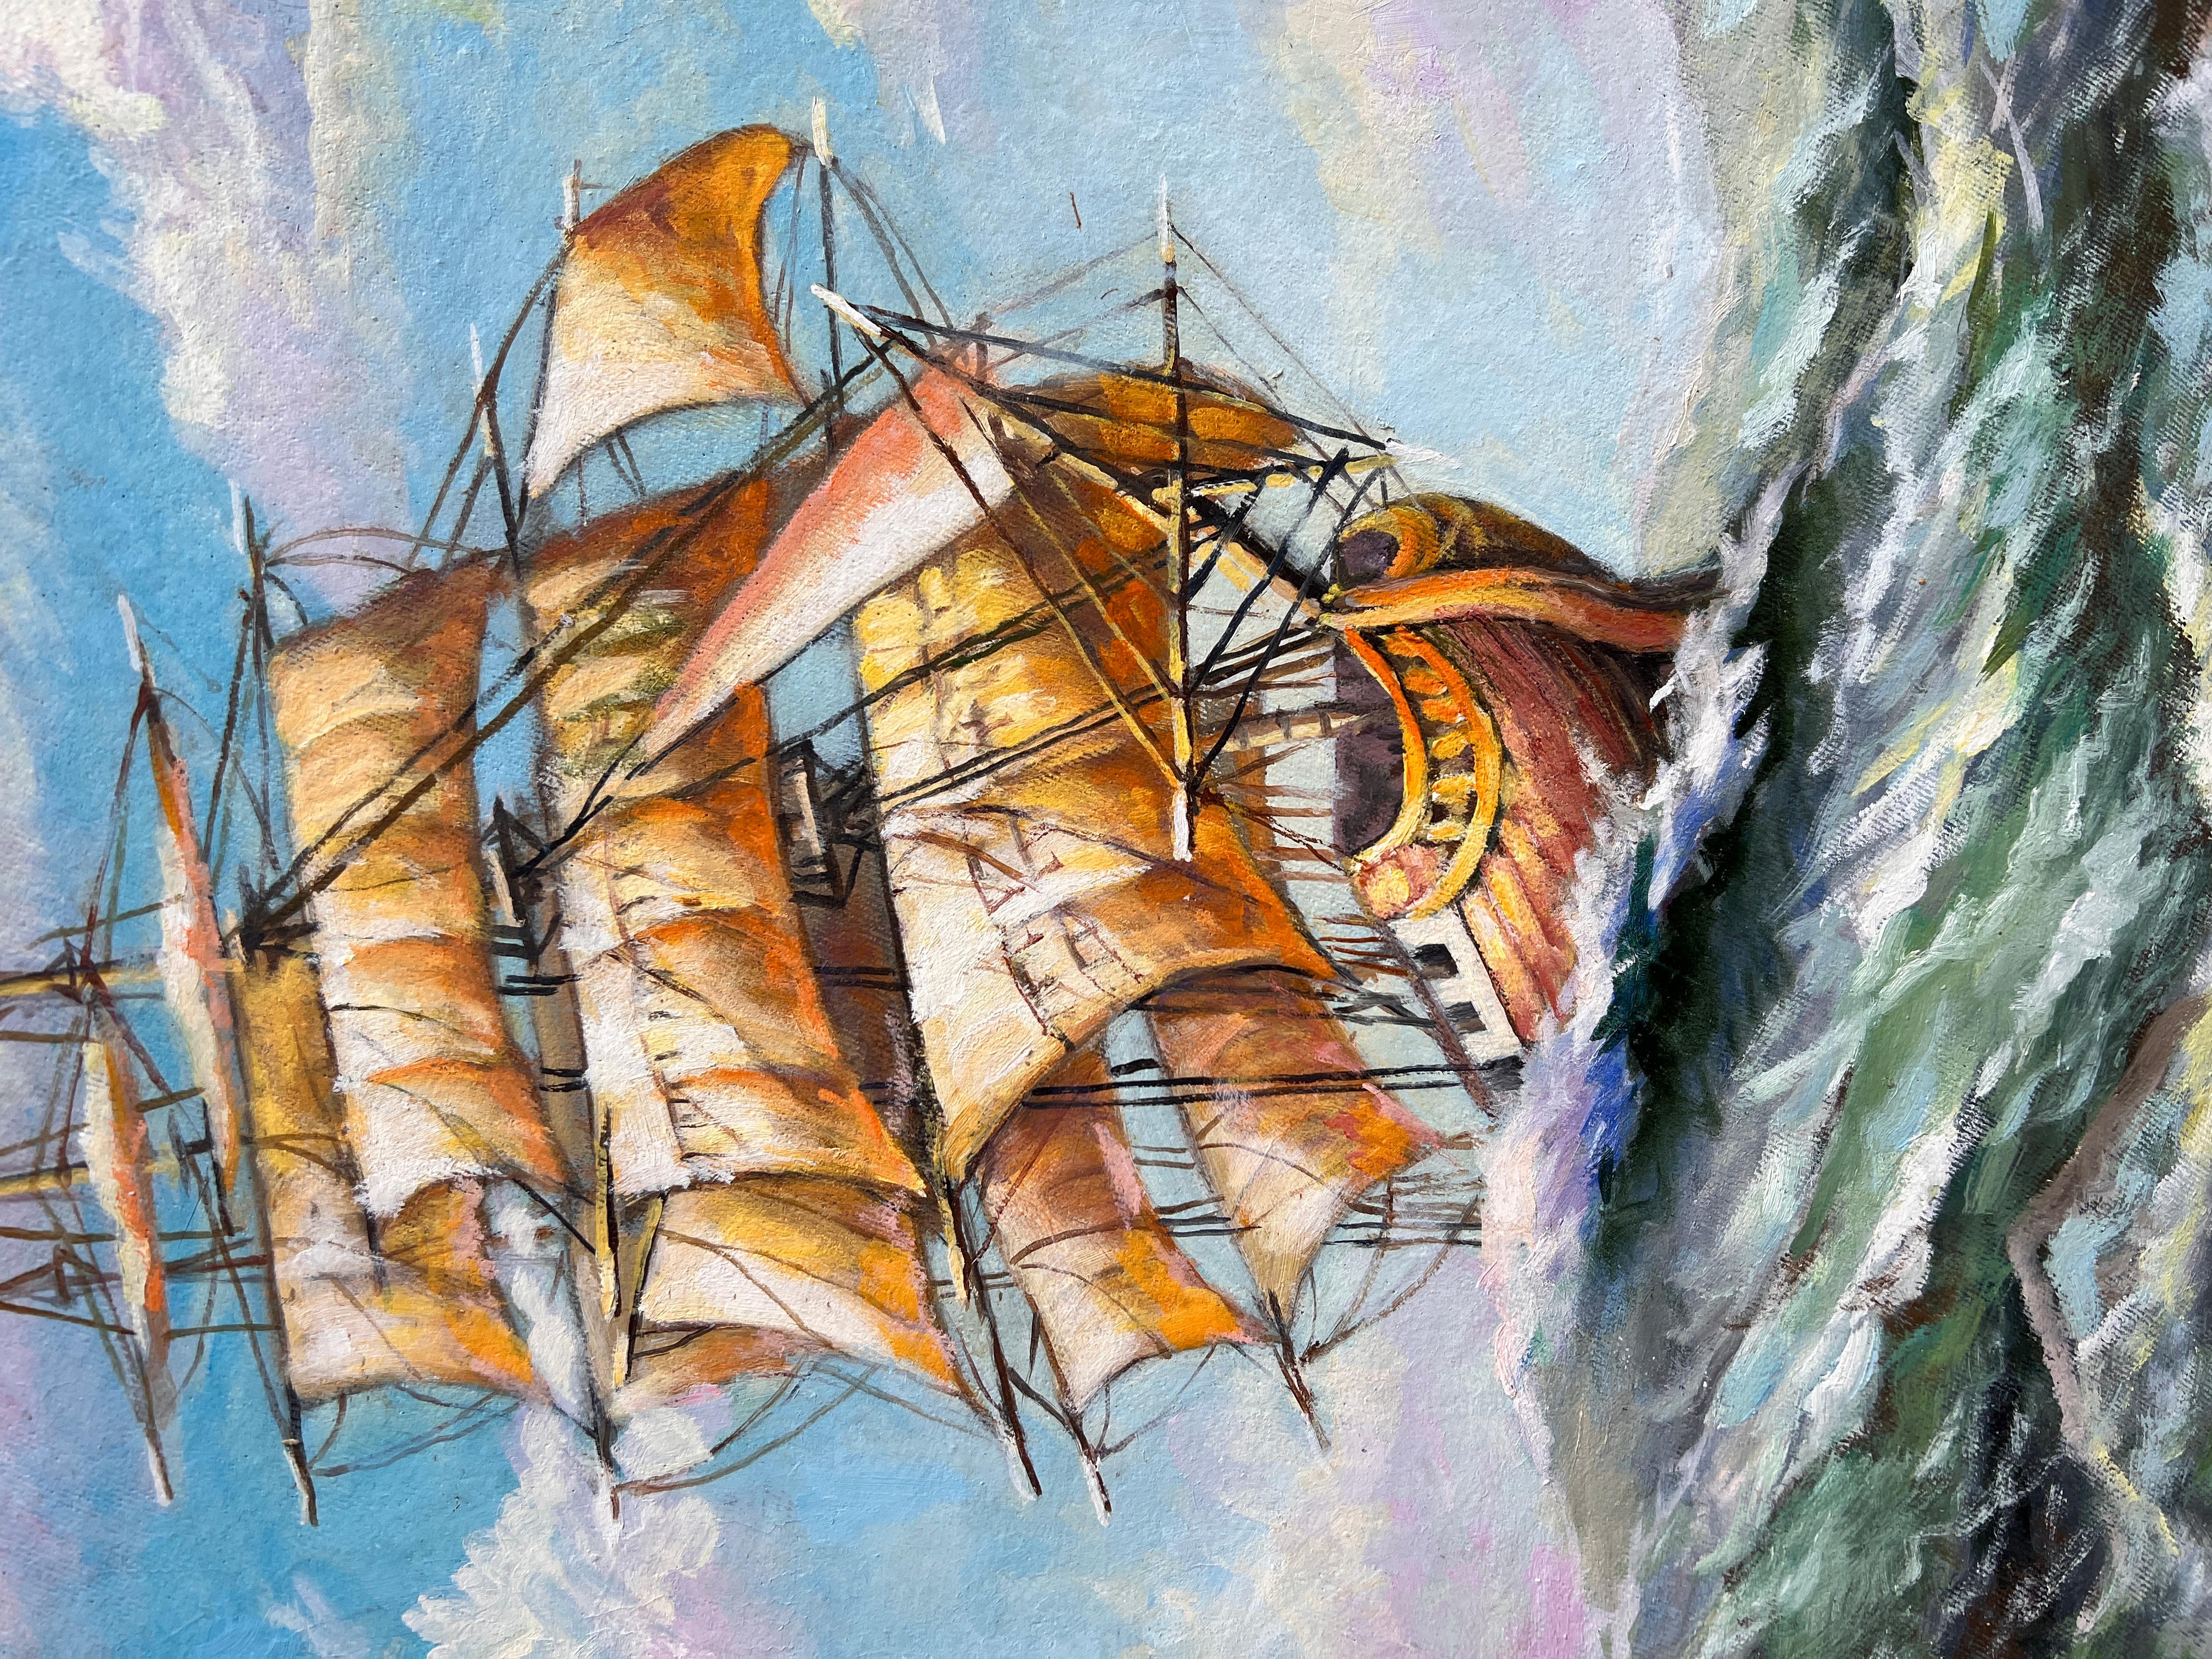 paintings of ships